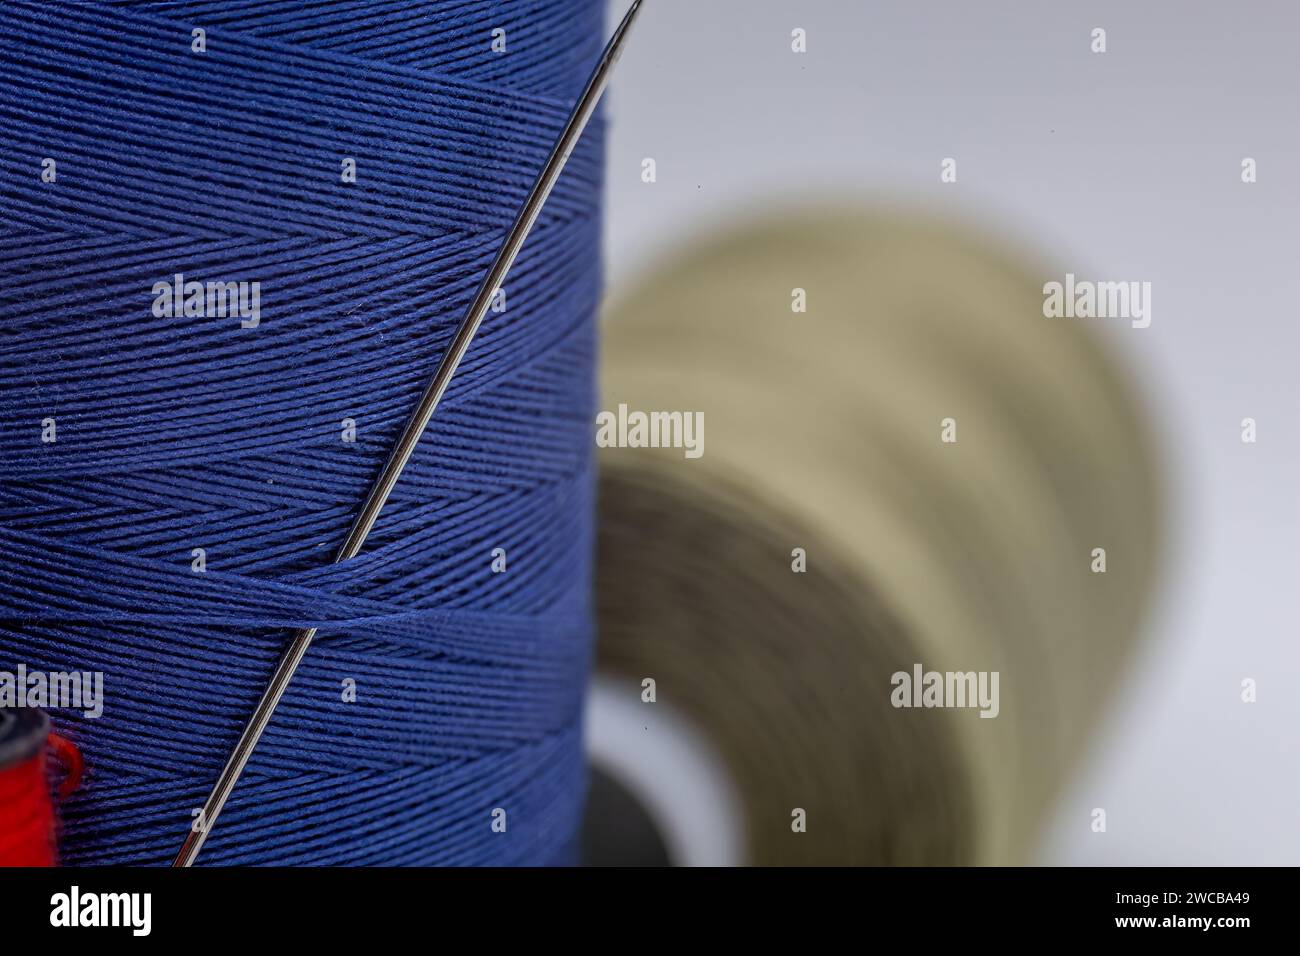 An image showcasing two spools of thread, one in a neutral color and the other in a vibrant shade of blue, positioned side by side Stock Photo